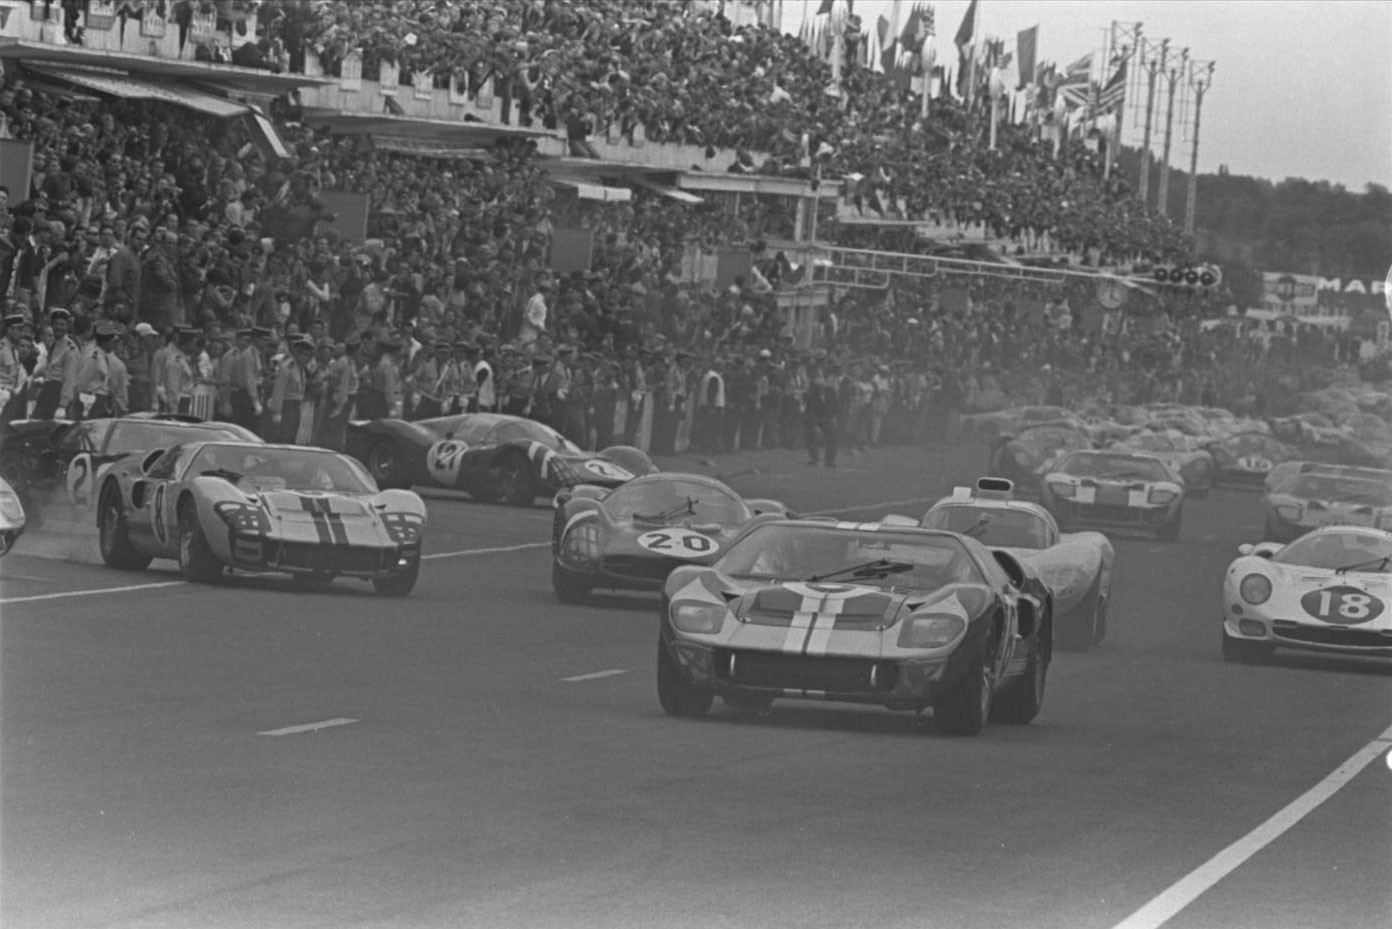 June 18, 1966. Ford and Ferrari jockey for position during the typically chaotic Le Mans start.